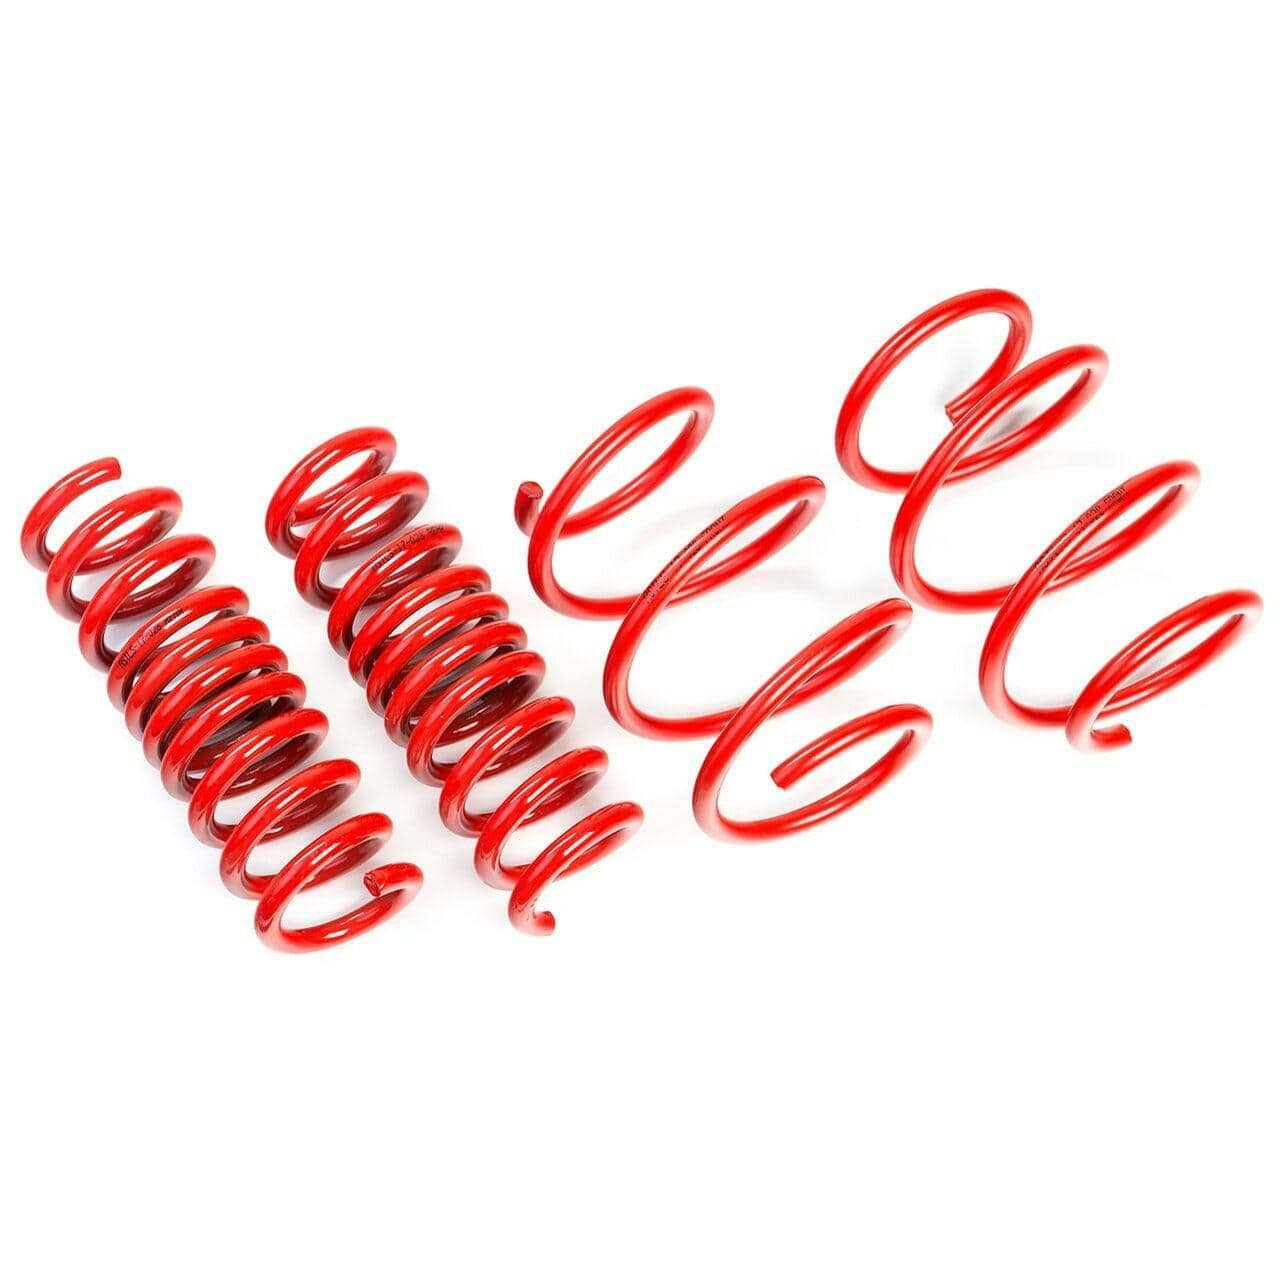 AST Suspension Lowering Springs (40MM/40MM TUV) - 1987-1992 Toyota Carina II LIM 2.0i/2.0D (ST/AT171/CT170) ASTLS-14-2272